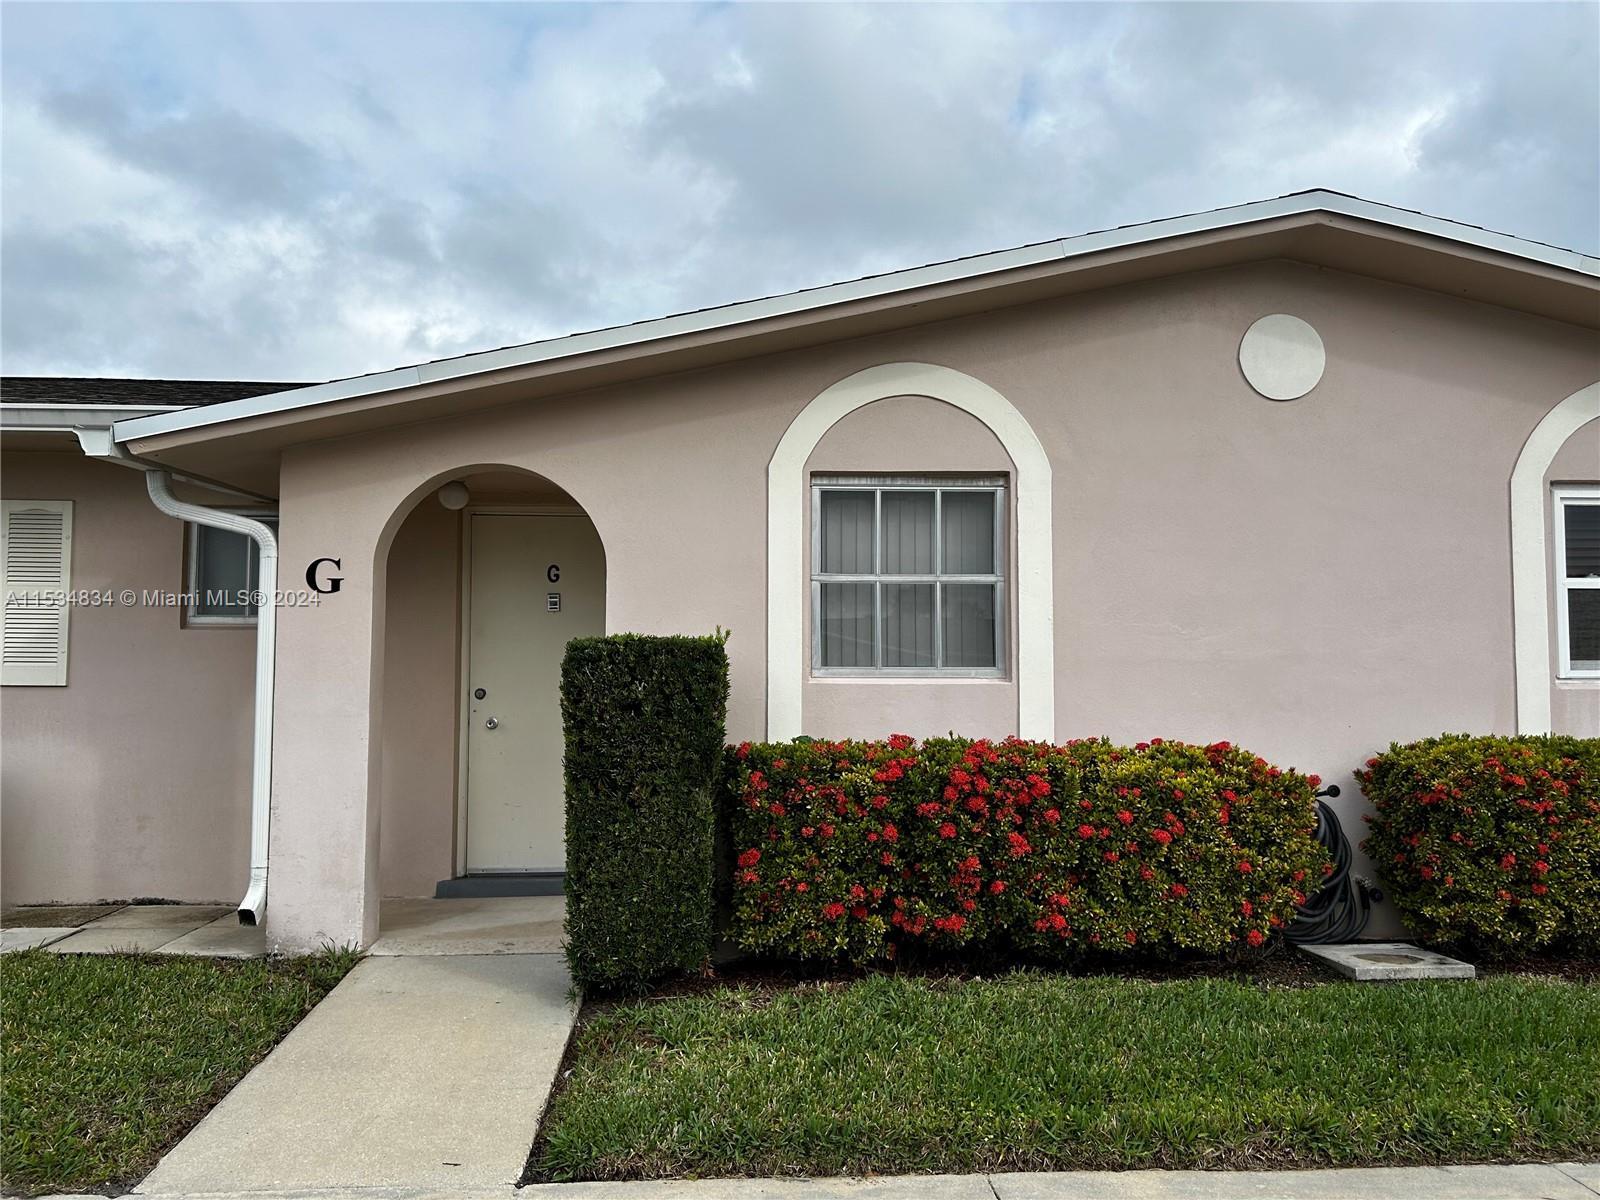 Photo of 2700 Dudley Dr E #G in West Palm Beach, FL